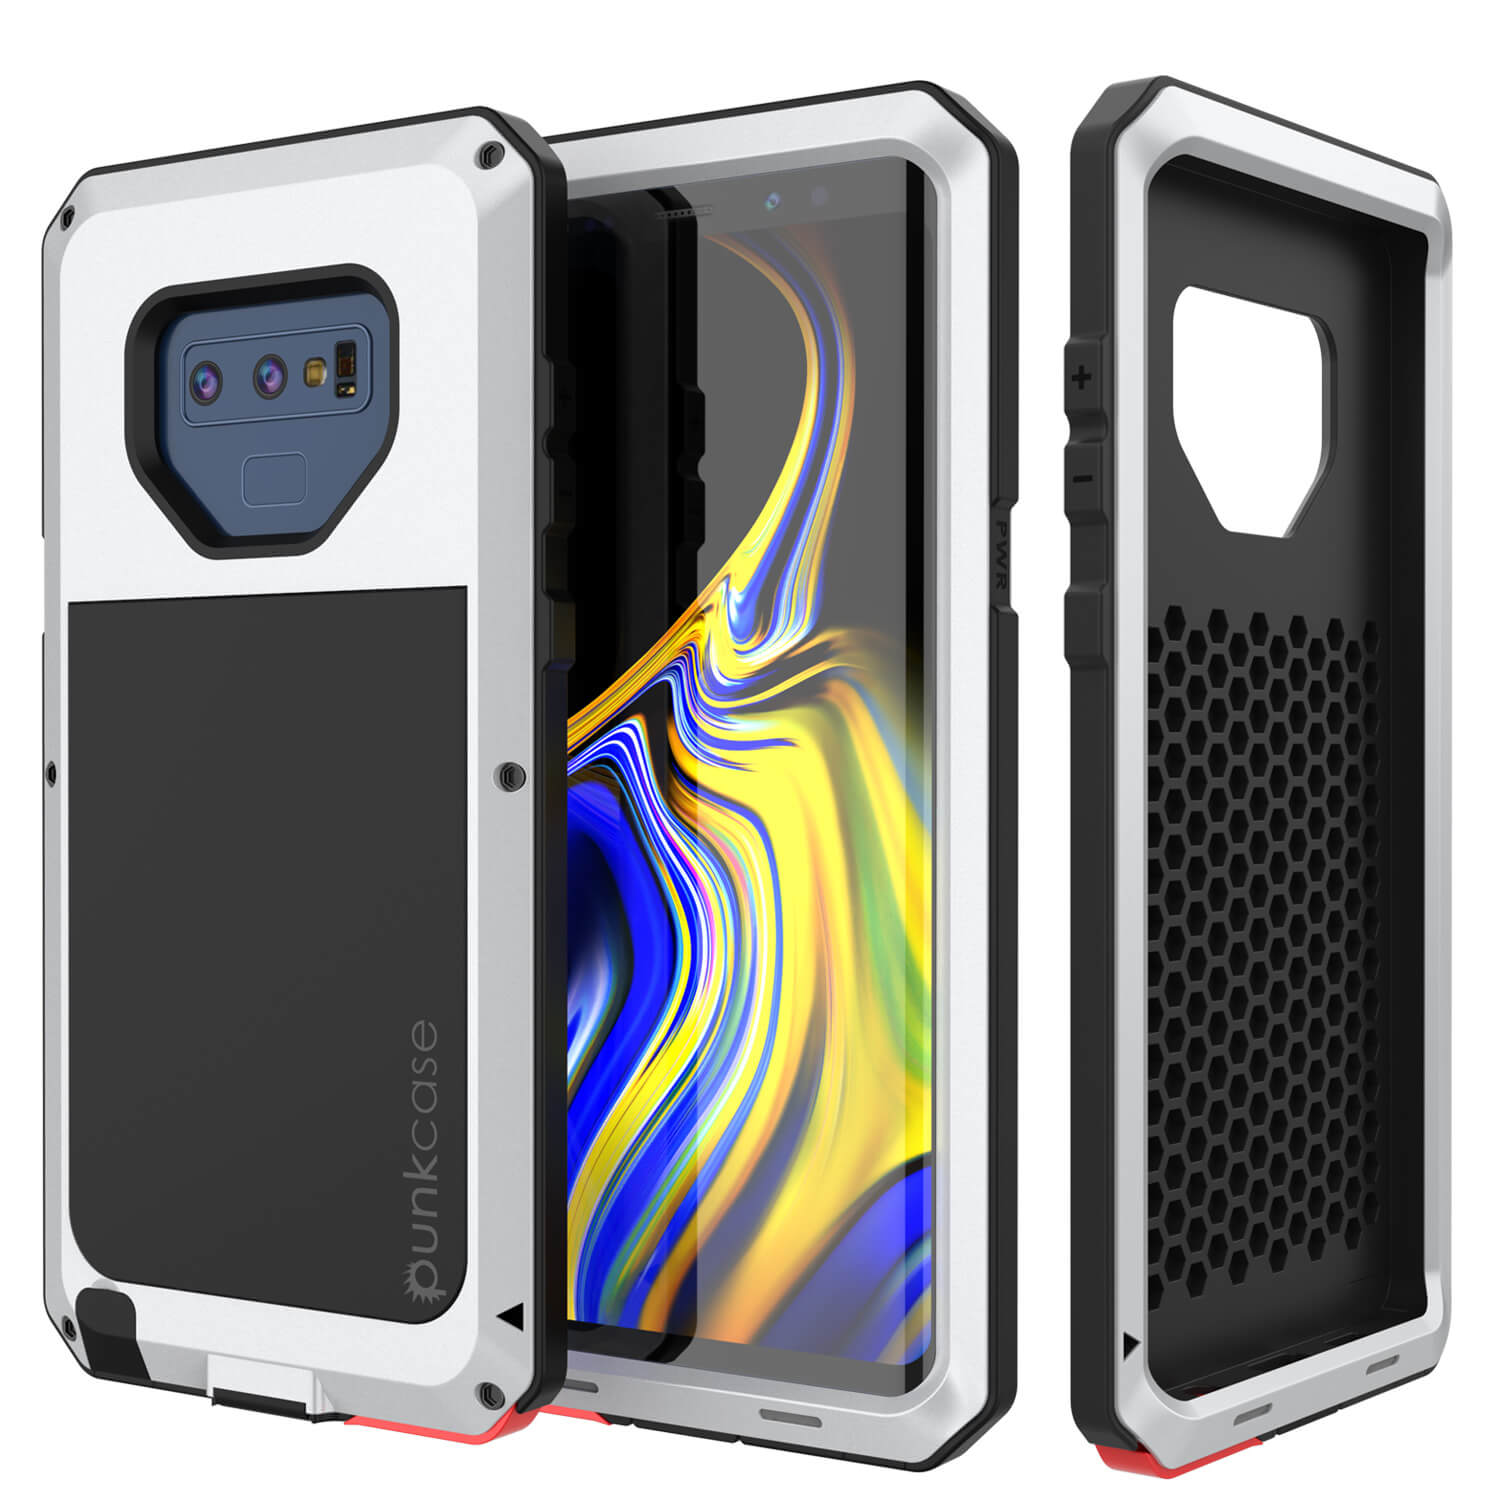 Galaxy Note 9  Case, PUNKcase Metallic White Shockproof  Slim Metal Armor Case [White] (Color in image: white)